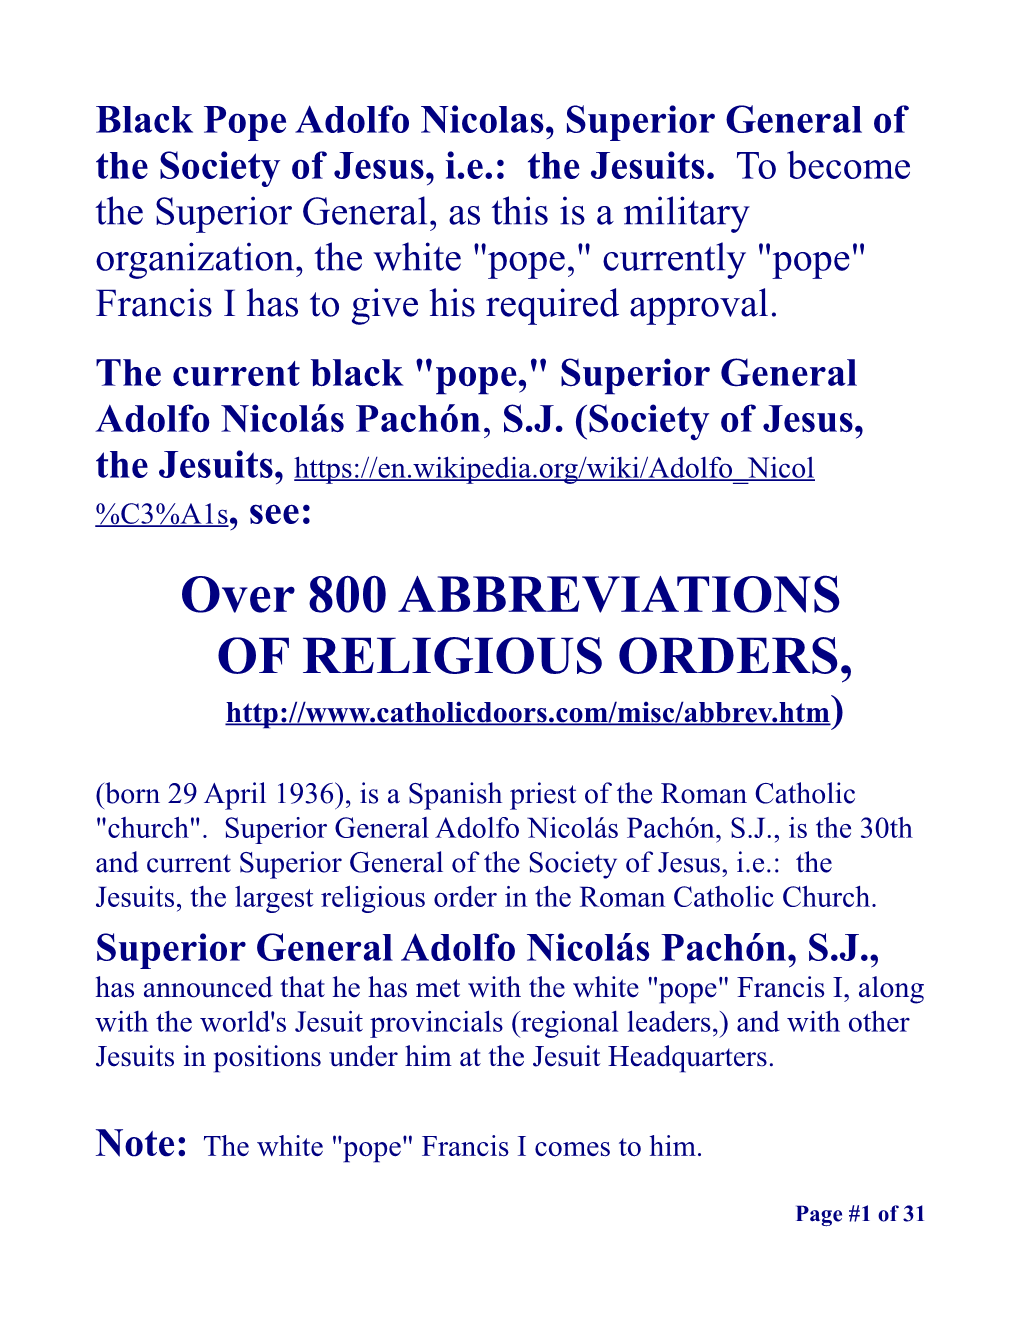 Over 800 ABBREVIATIONSOF RELIGIOUS ORDERS